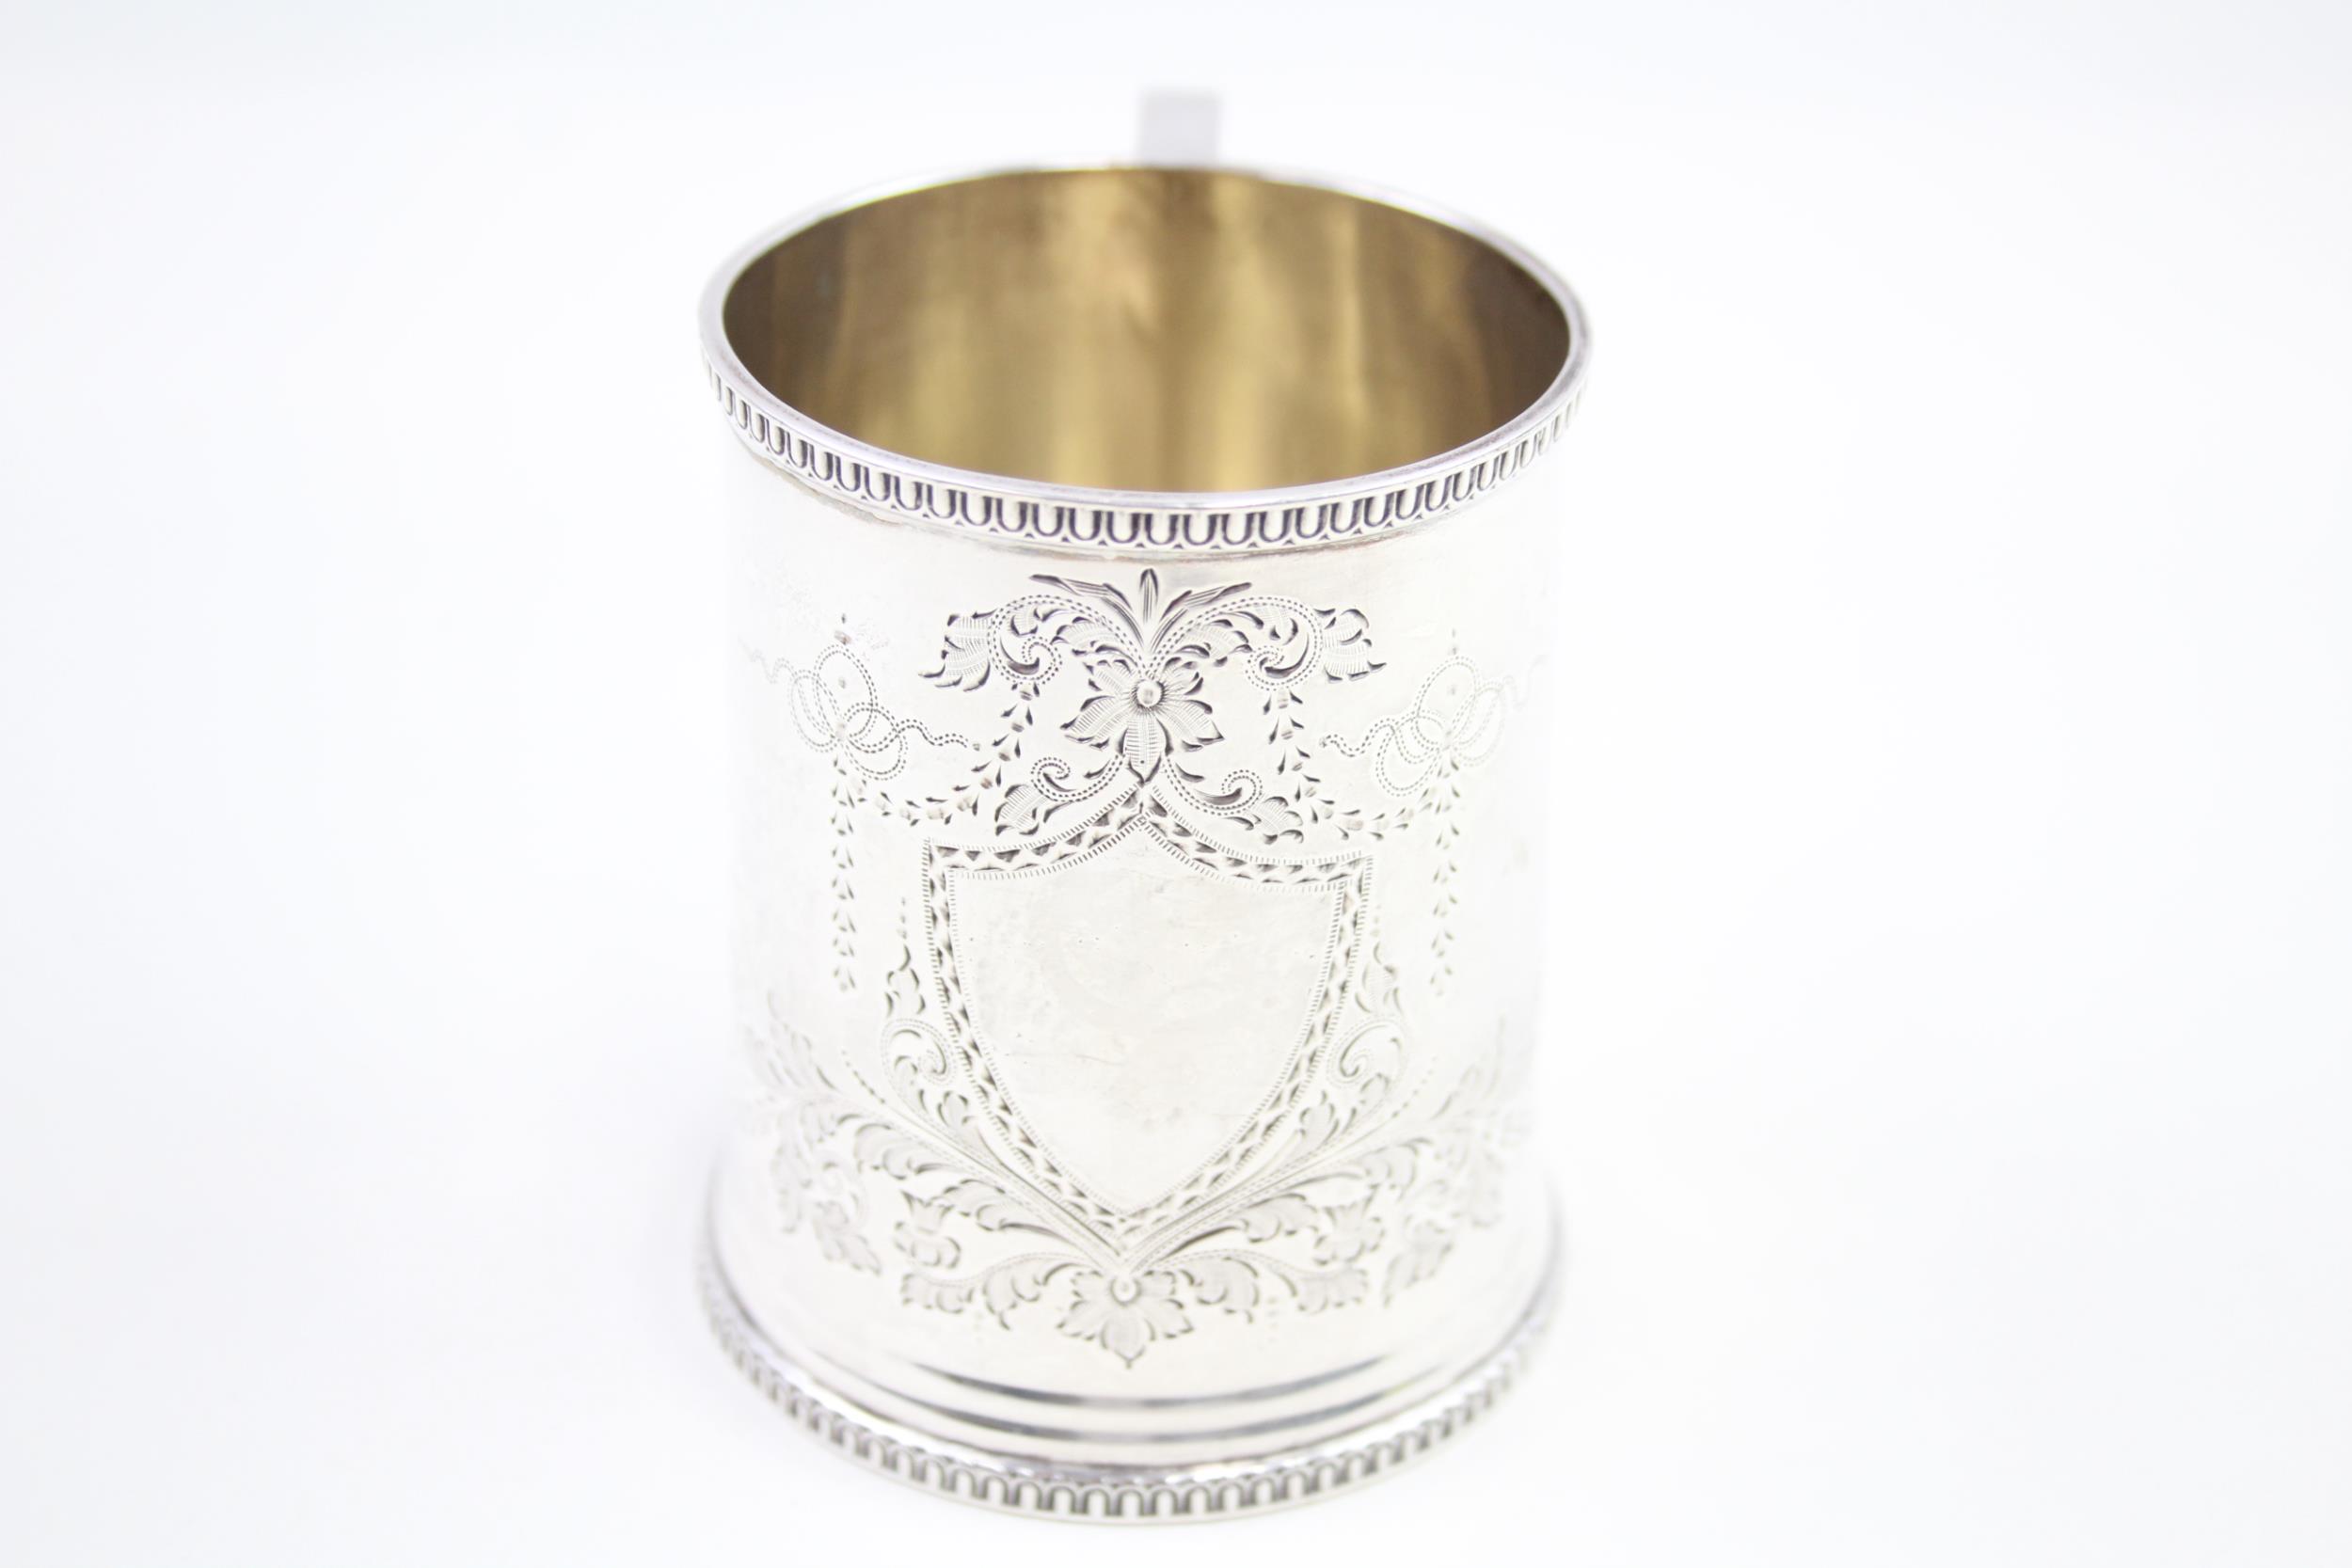 Antique Hallmarked 1912 London Sterling Silver Christening Cup (105g) // w/ Vacant Cartouche Maker -